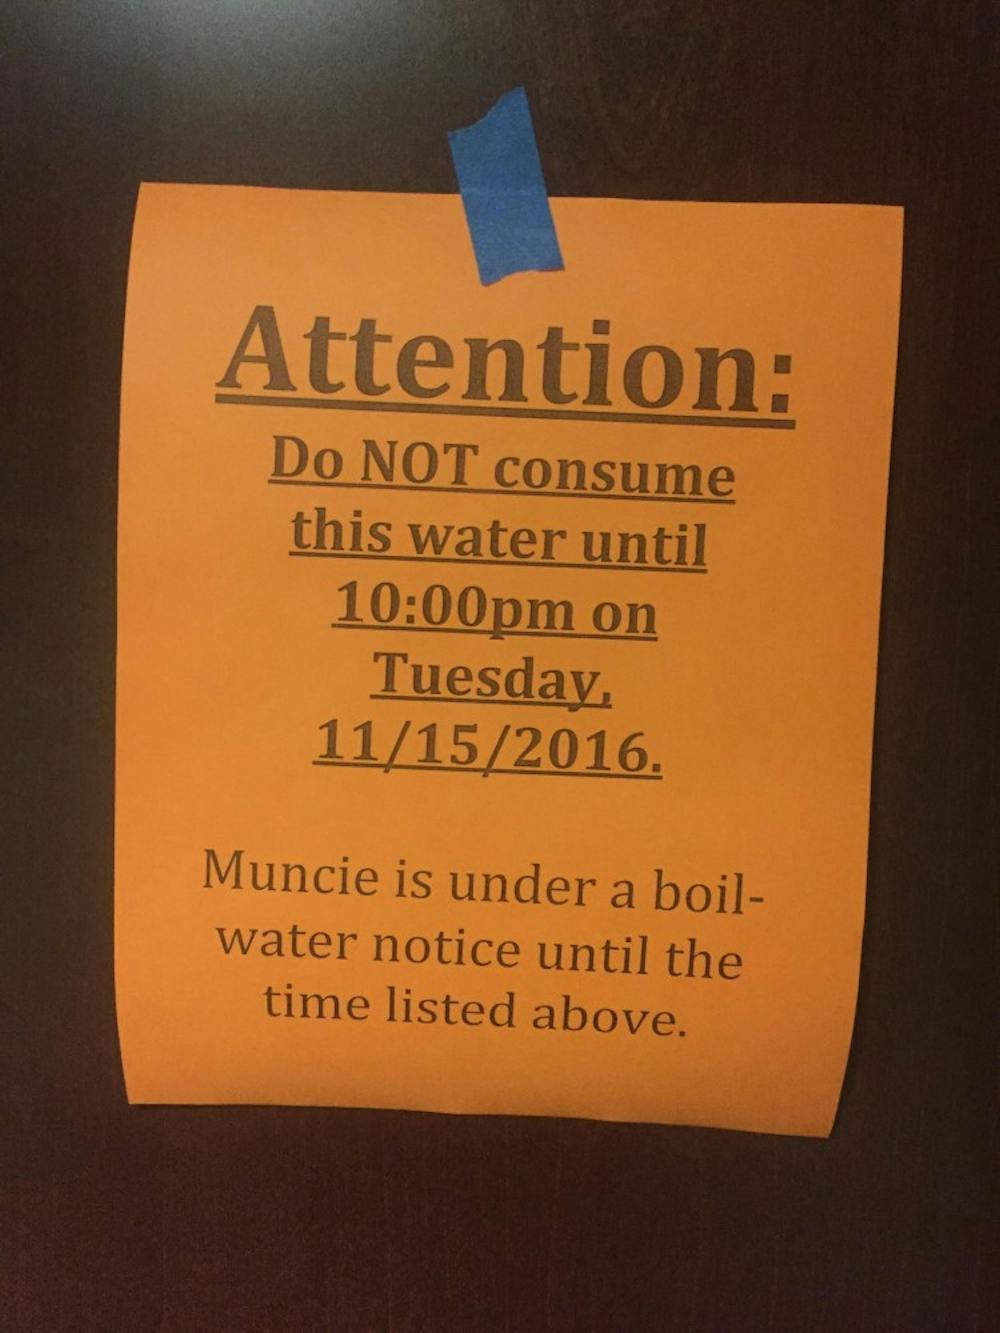 <p>A flier was posted within residence halls on Ball State's campus in order to inform residents of the 24-hour&nbsp;boil notice issued on Nov. 14. Many worried about lead contamination, like in Flint, Michigan, but&nbsp;Muncie's water supply is now safe to consume.&nbsp;<em style="background-color: initial;">Provided Photo</em></p>